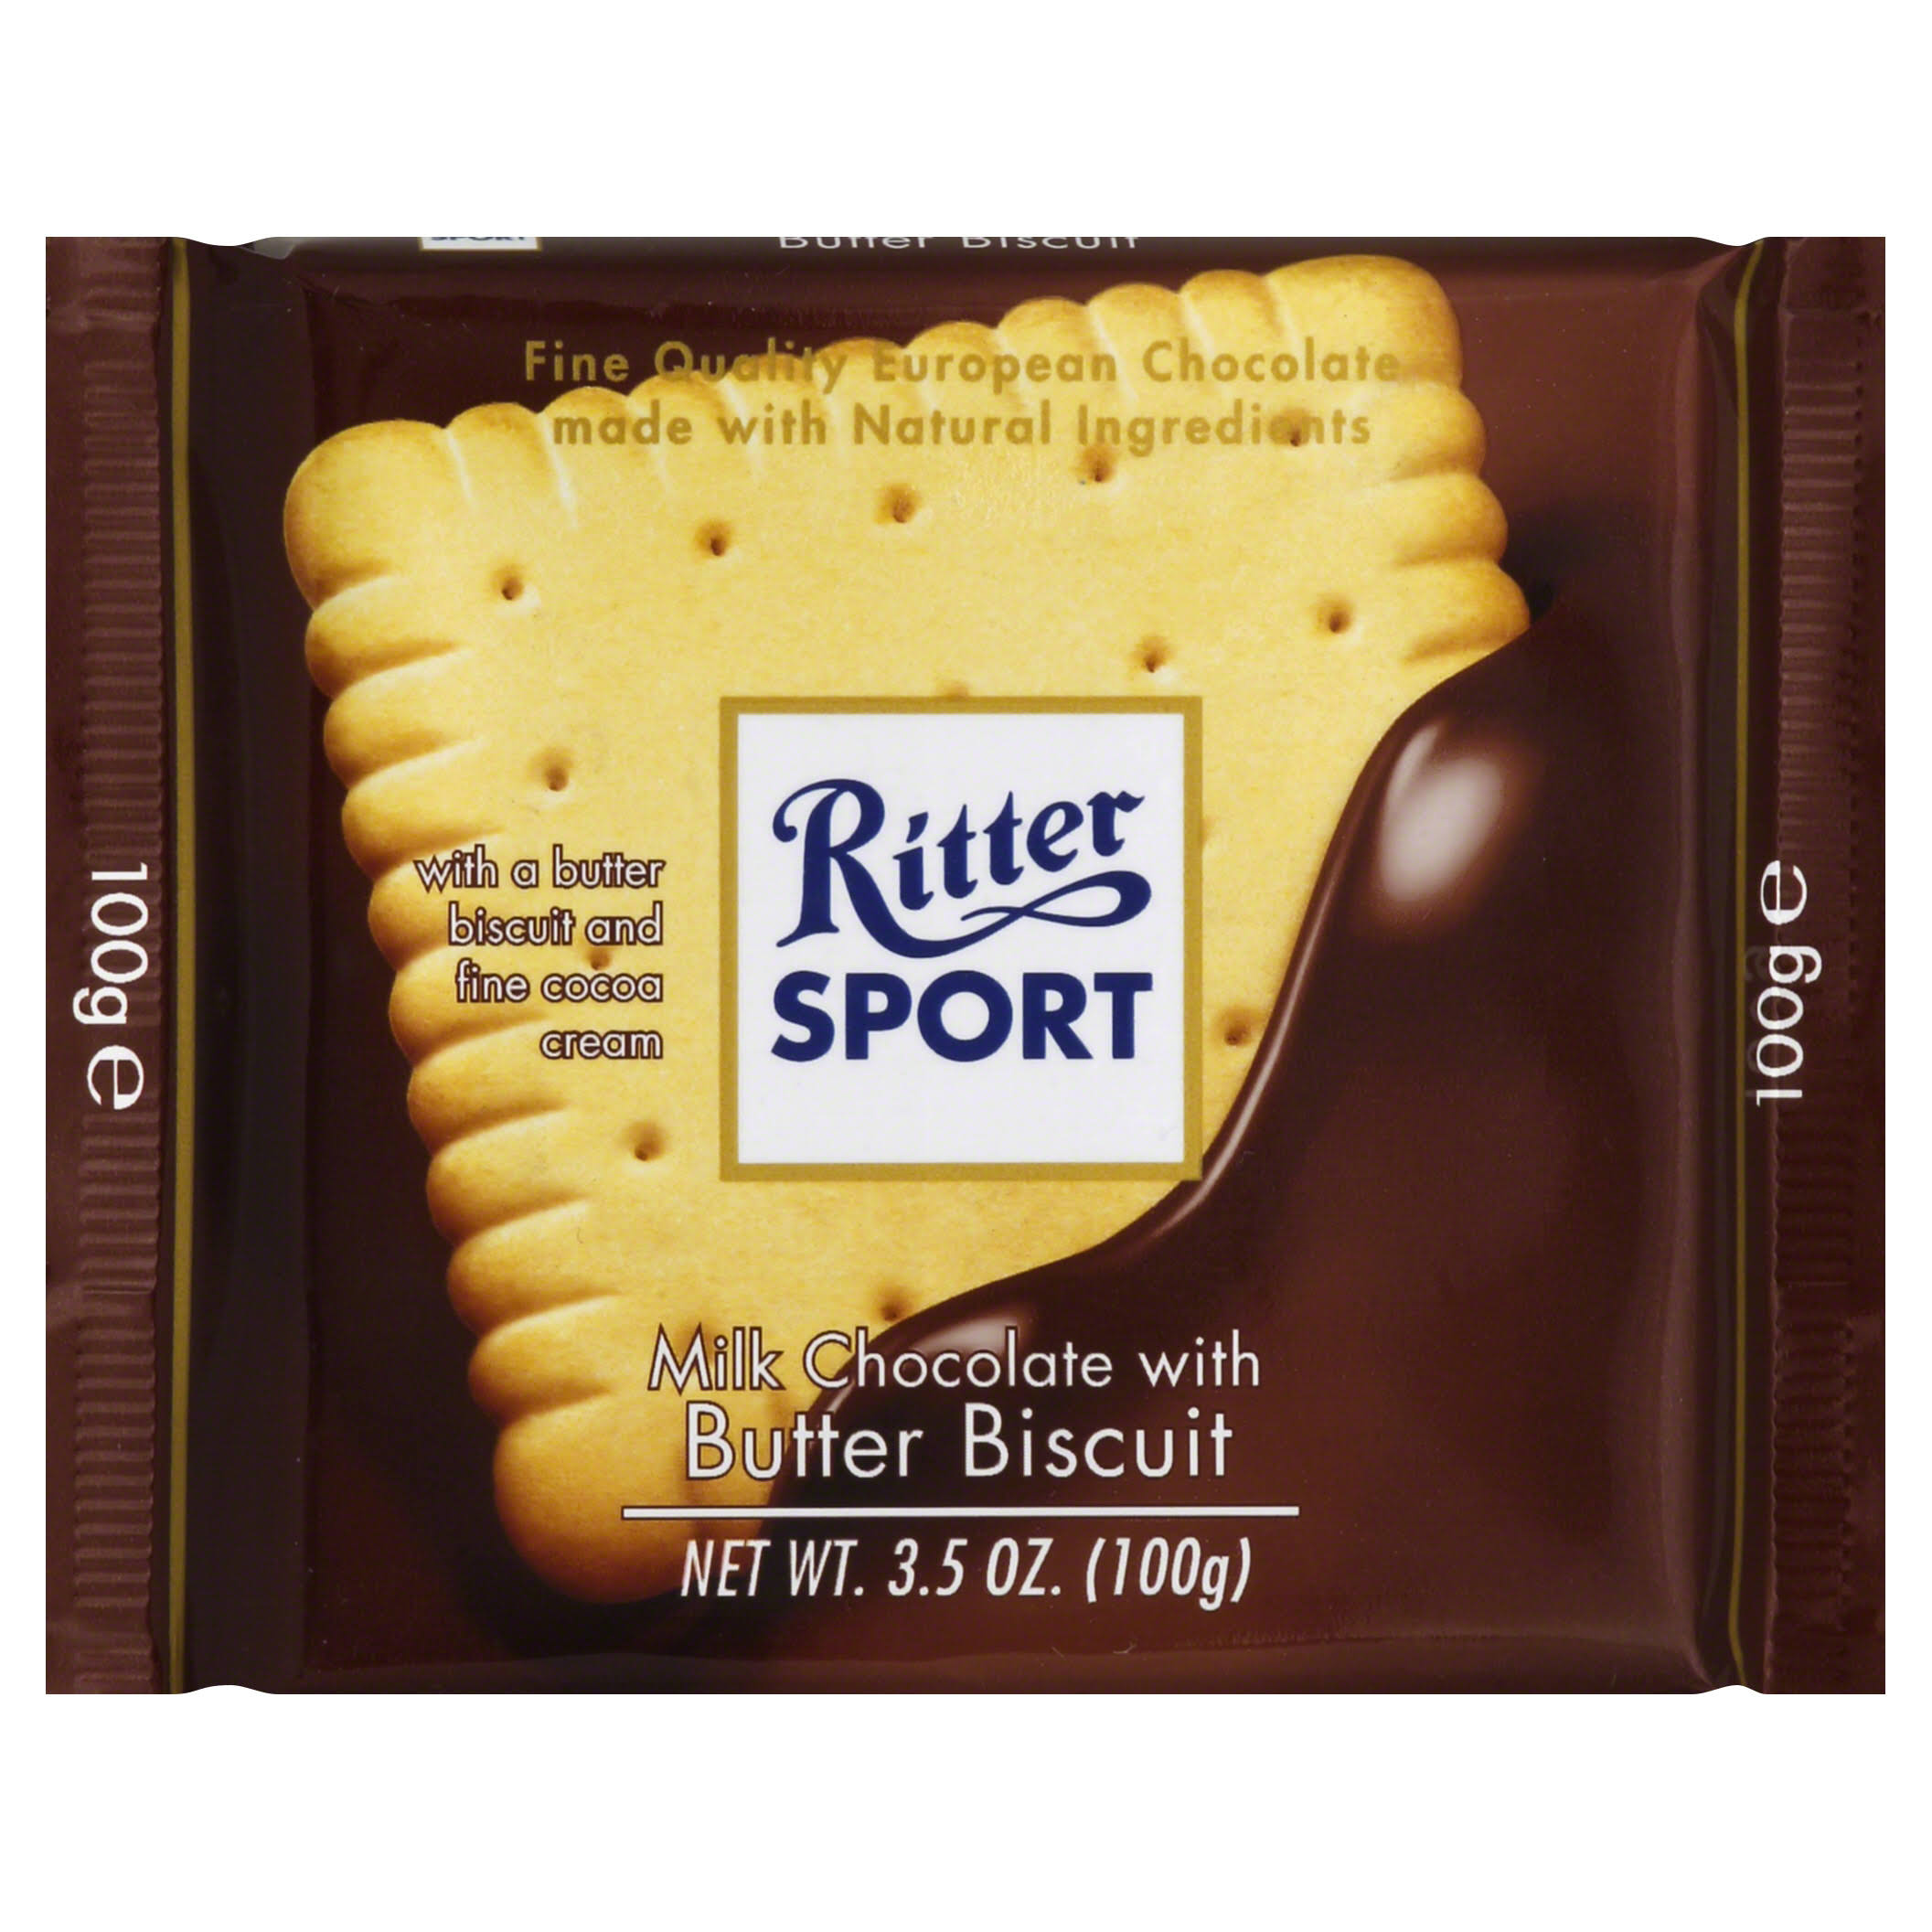 Ritter Sport - Milk Chocolate With Butter Biscuit, 100g